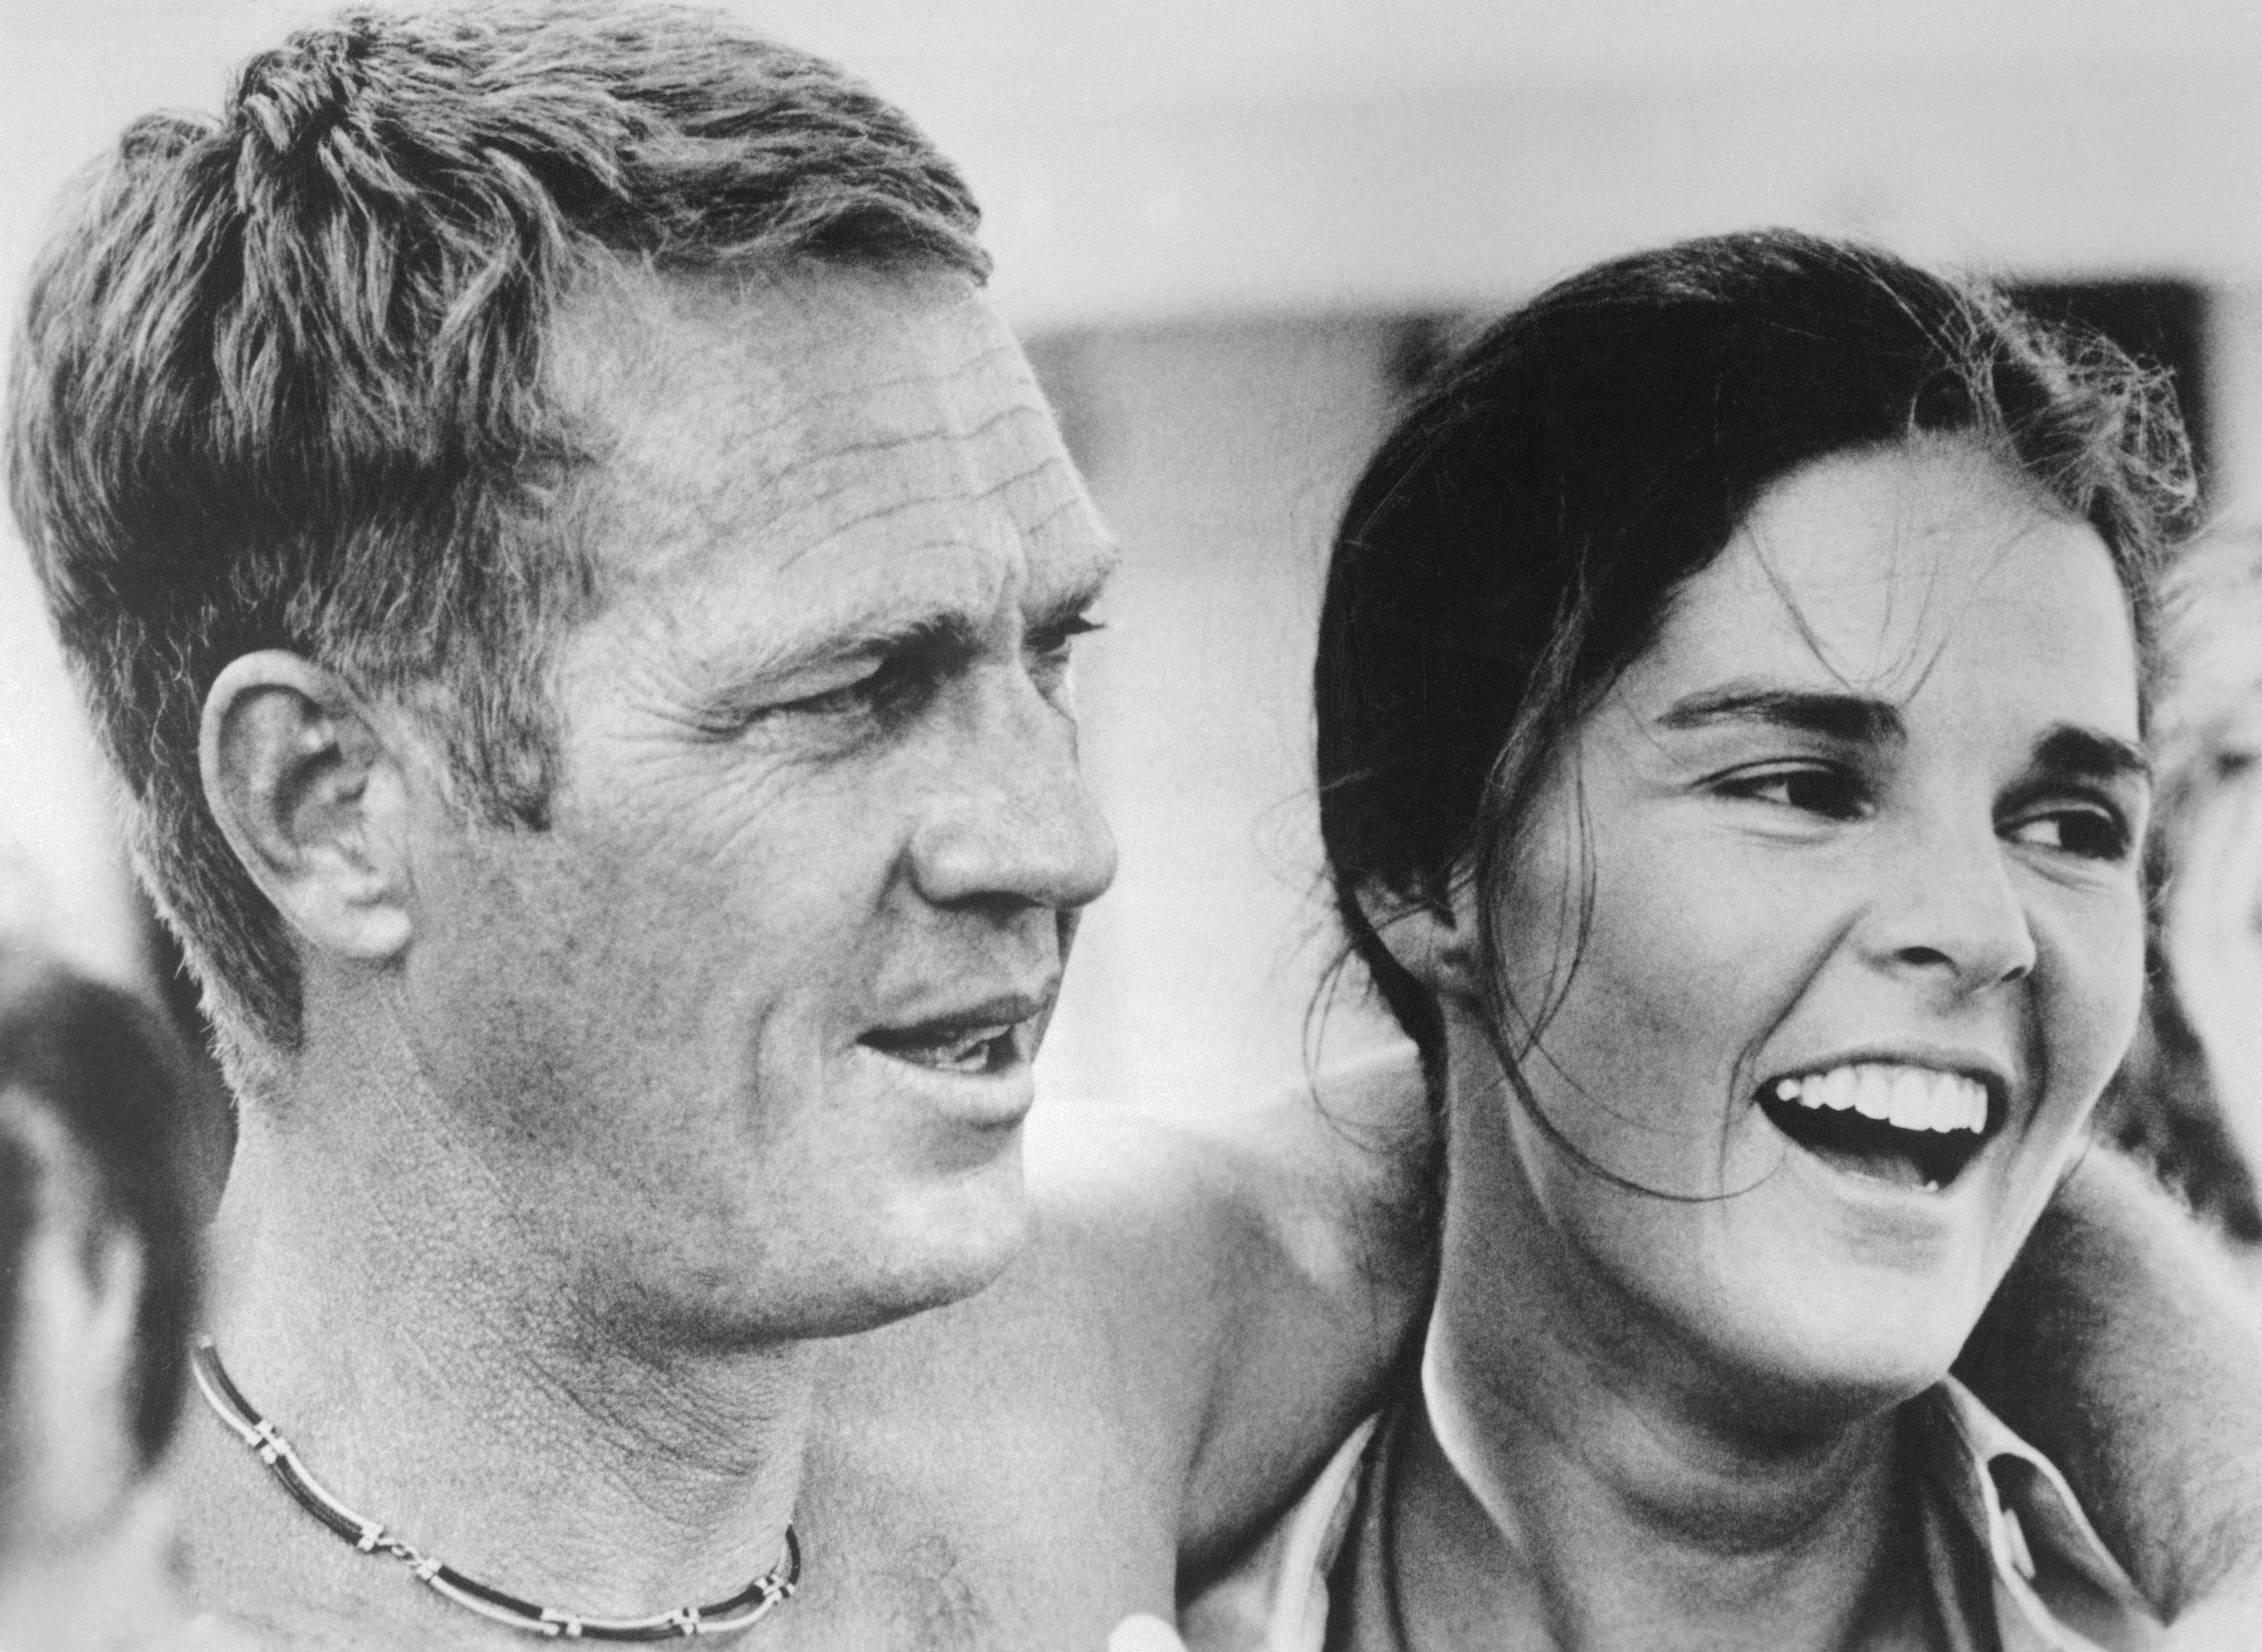 Television icon actor Steve McQueen and Ali McGraw pictured during a scene from the 1972 movie "The Getaway." / Source: Getty Images